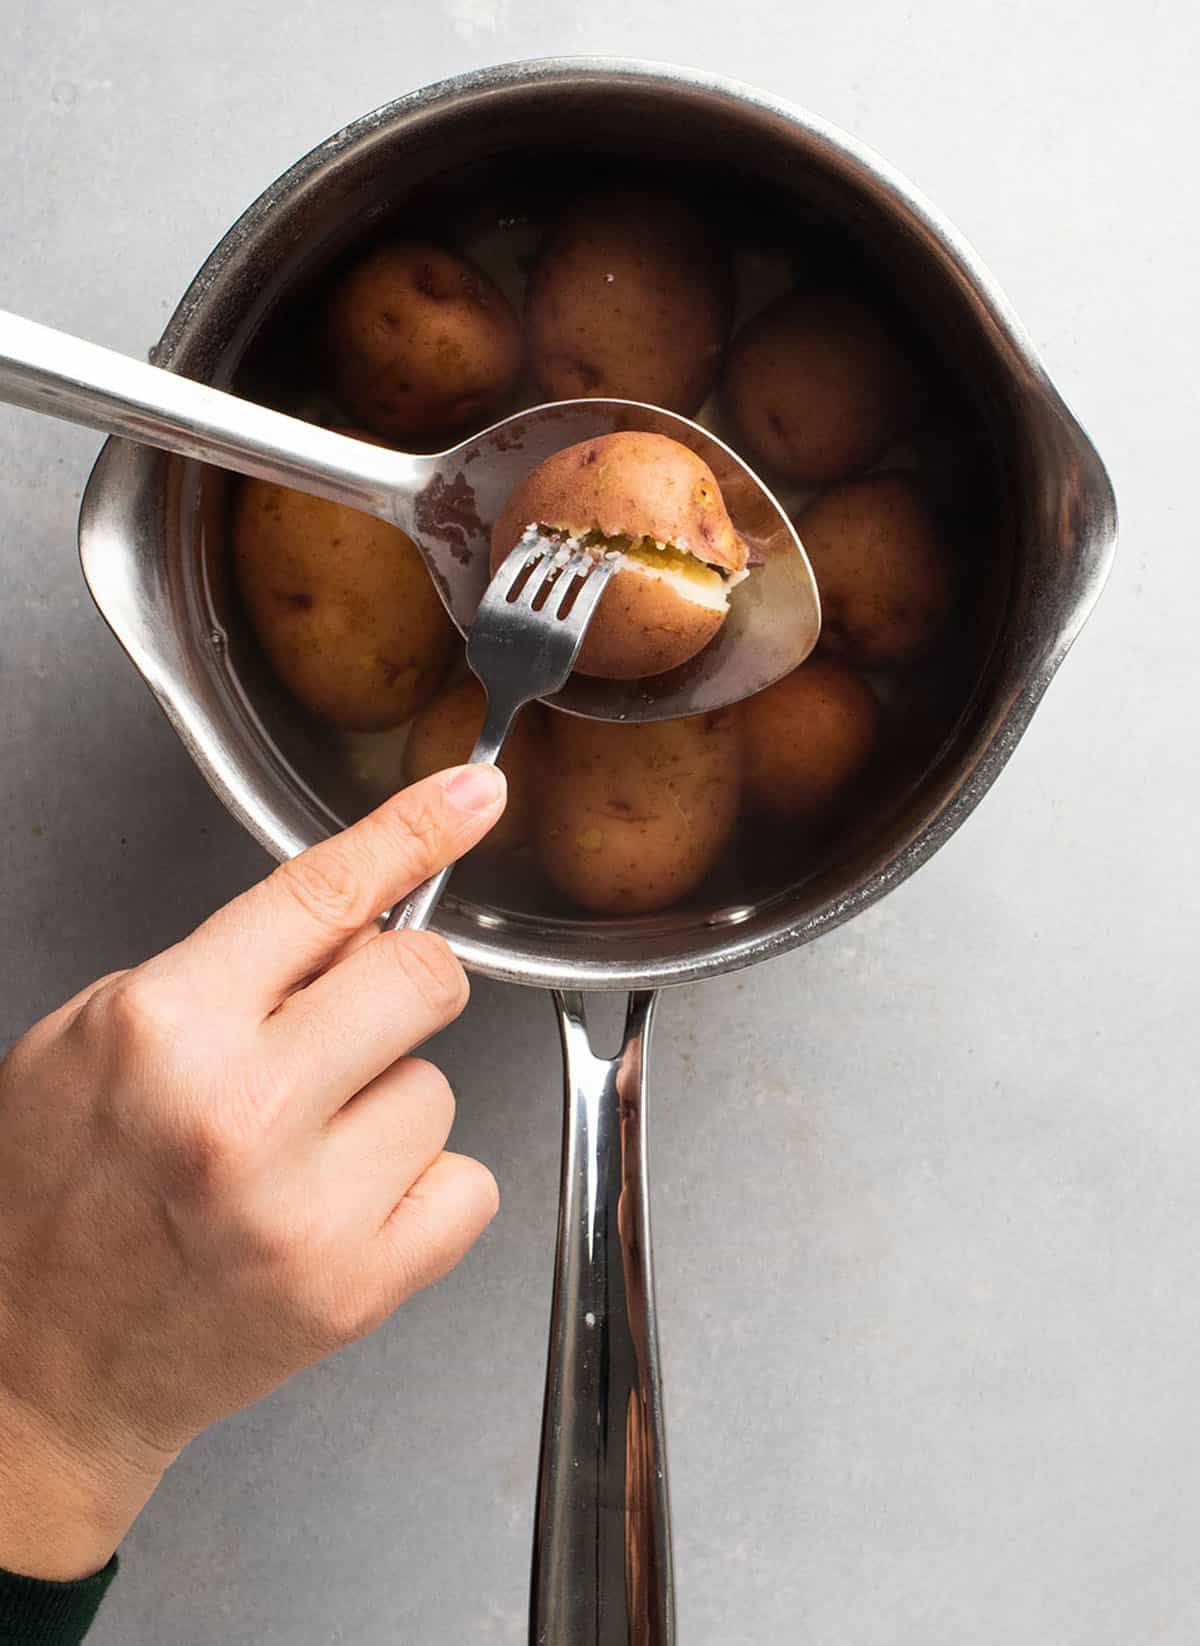 Piercing a potato with a fork to check for doneness.